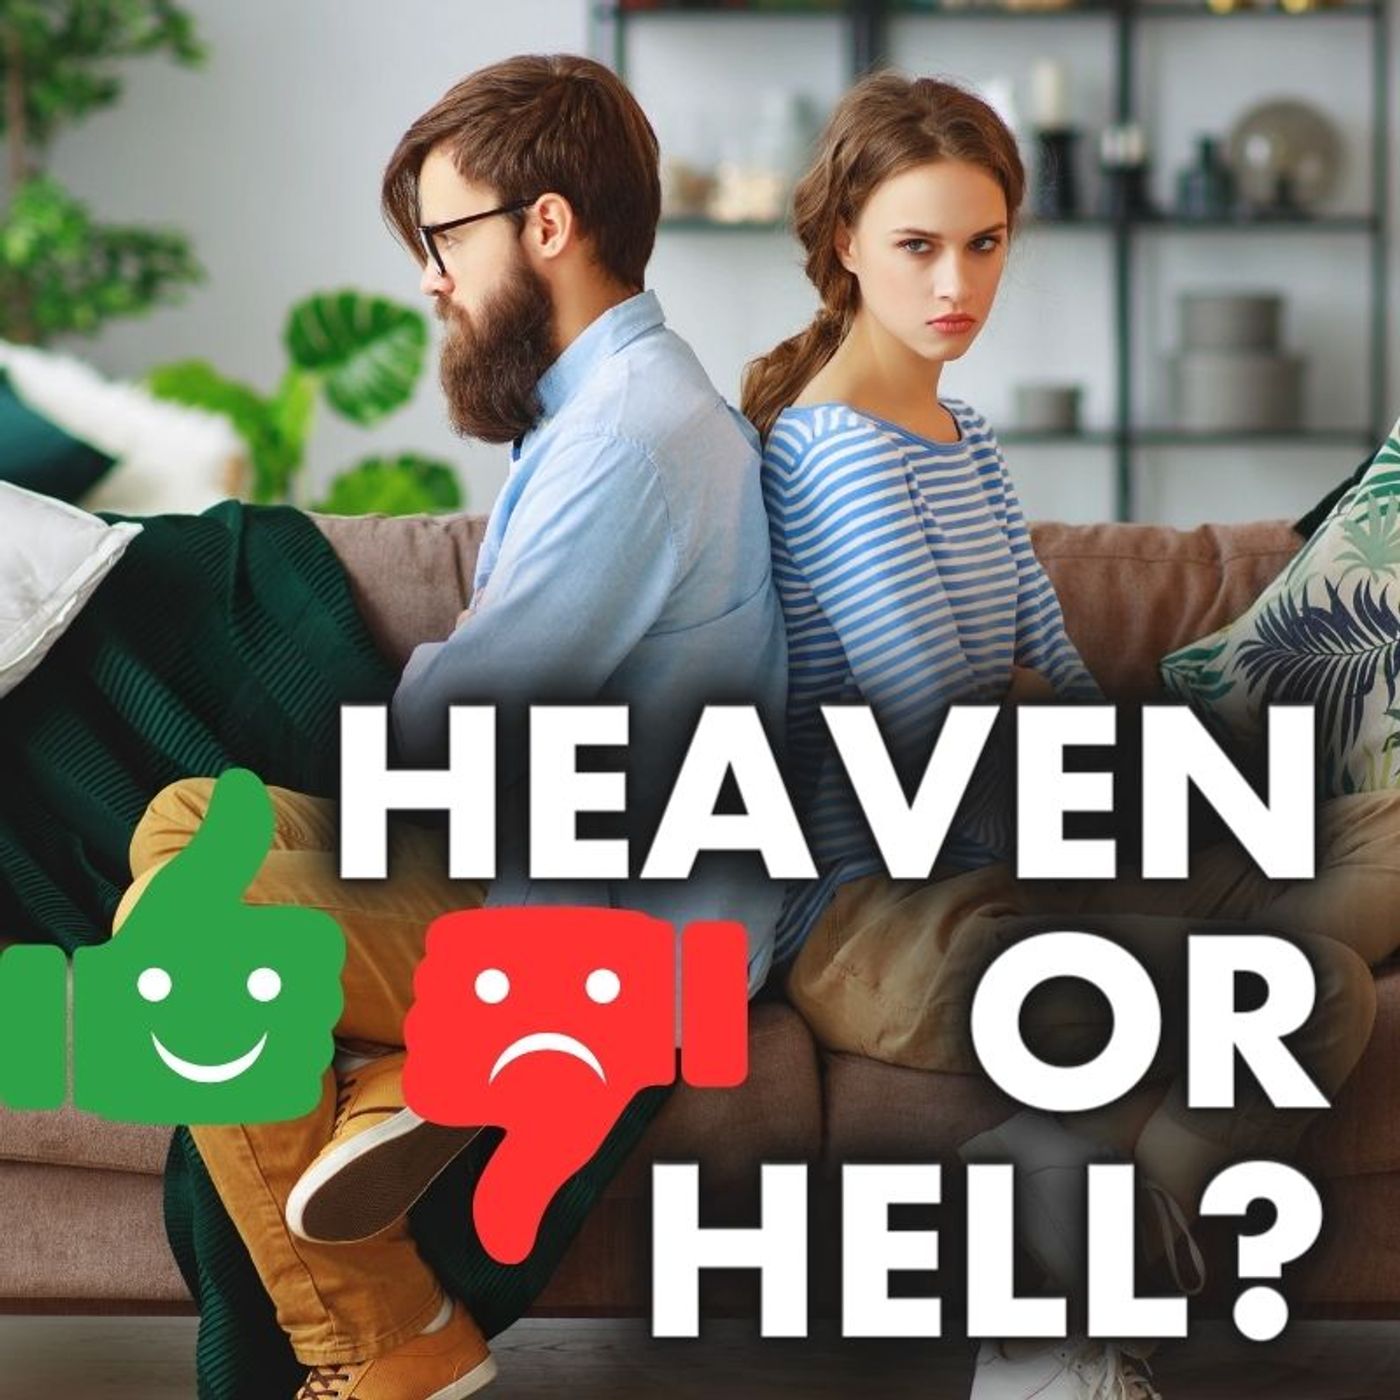 Is Your Marriage Like Heaven or Hell? 😱